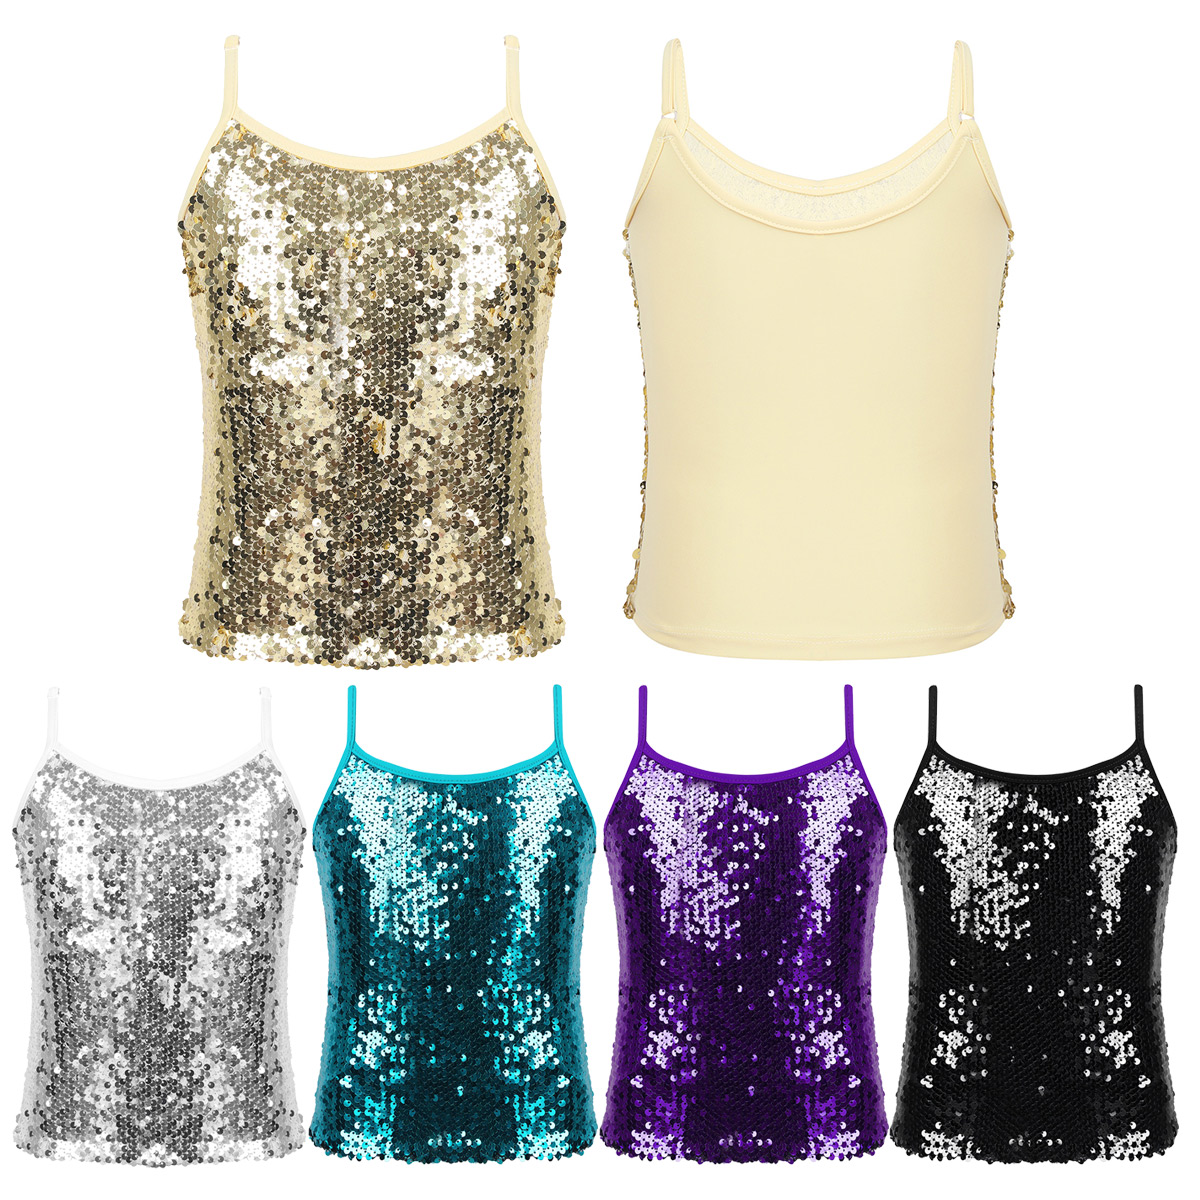 Girls Sparkly Sequined Tank Tops Kids Shiny Metallic Gym Performance Camisole